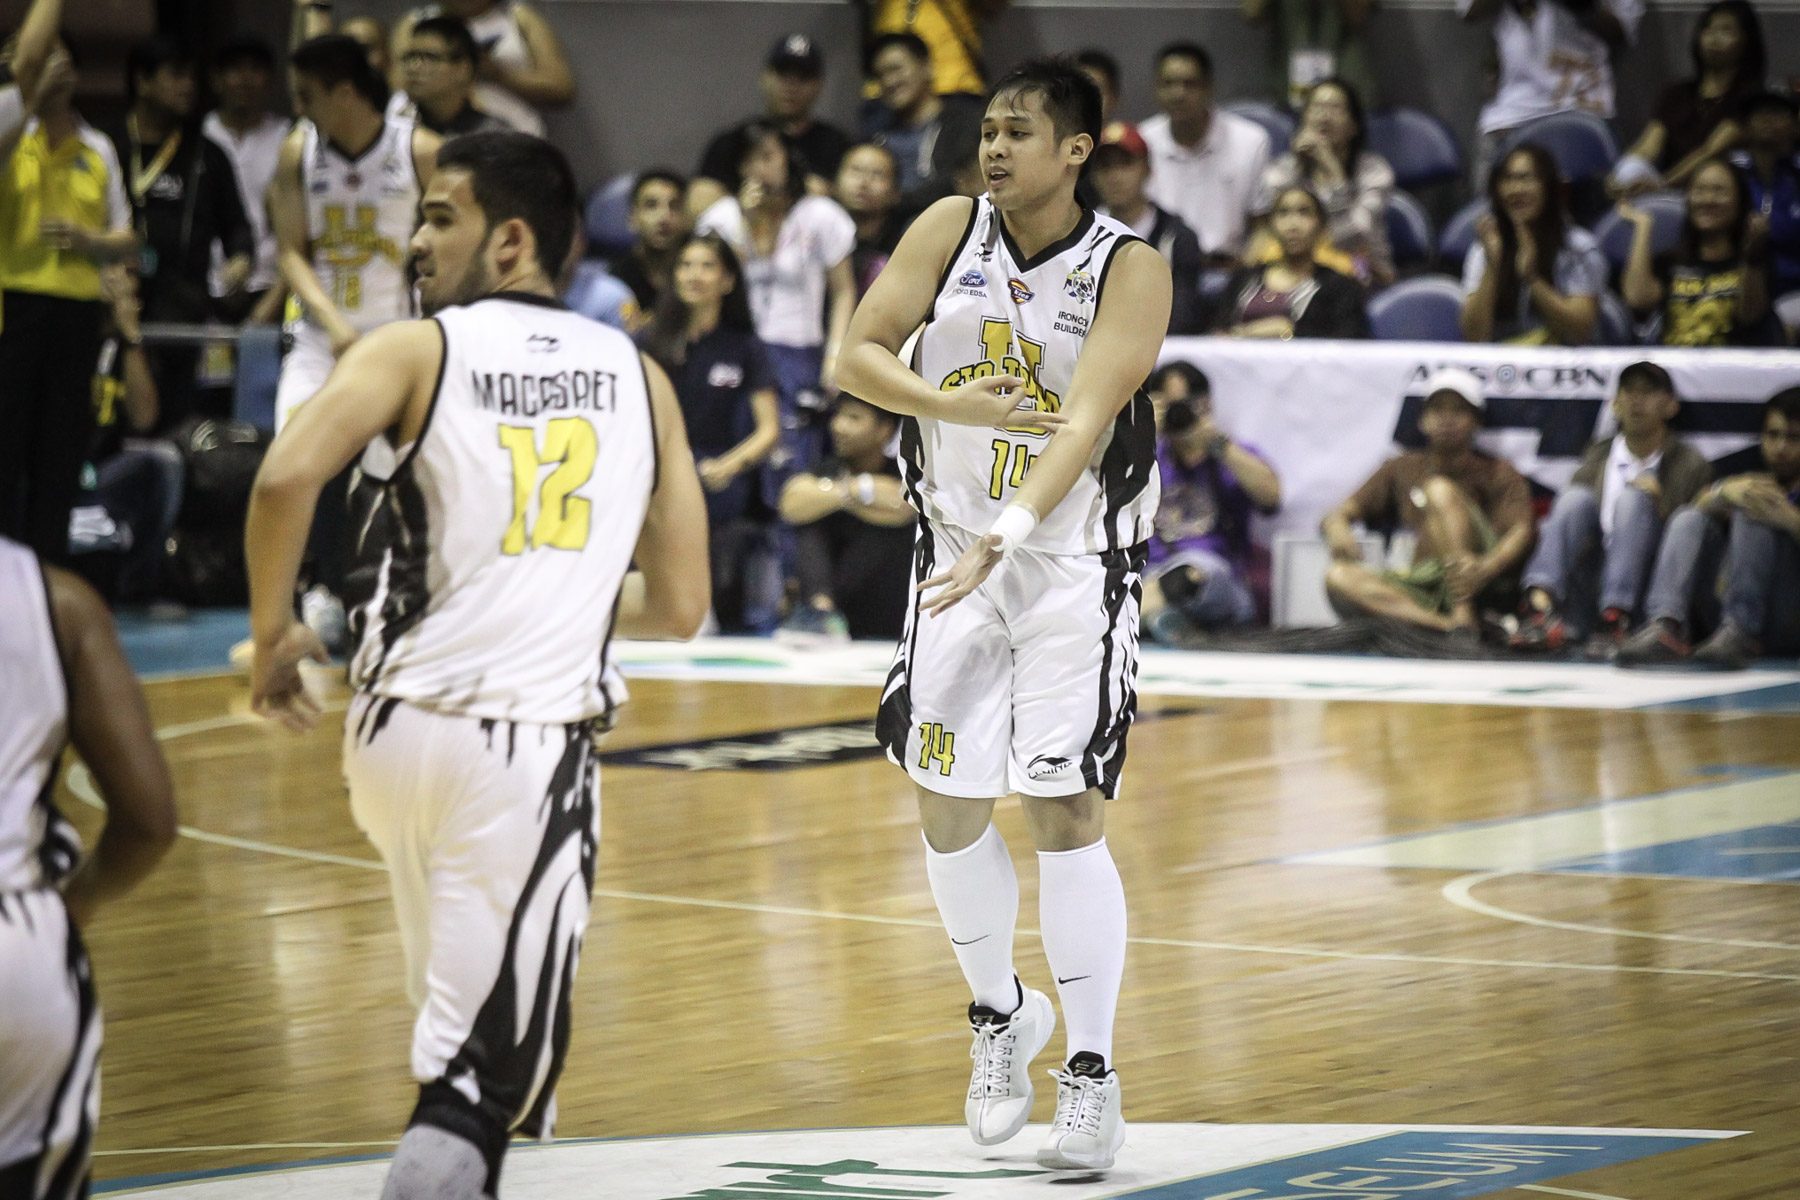 UST’s Embons Bonleon to undergo surgery, out 6-8 months